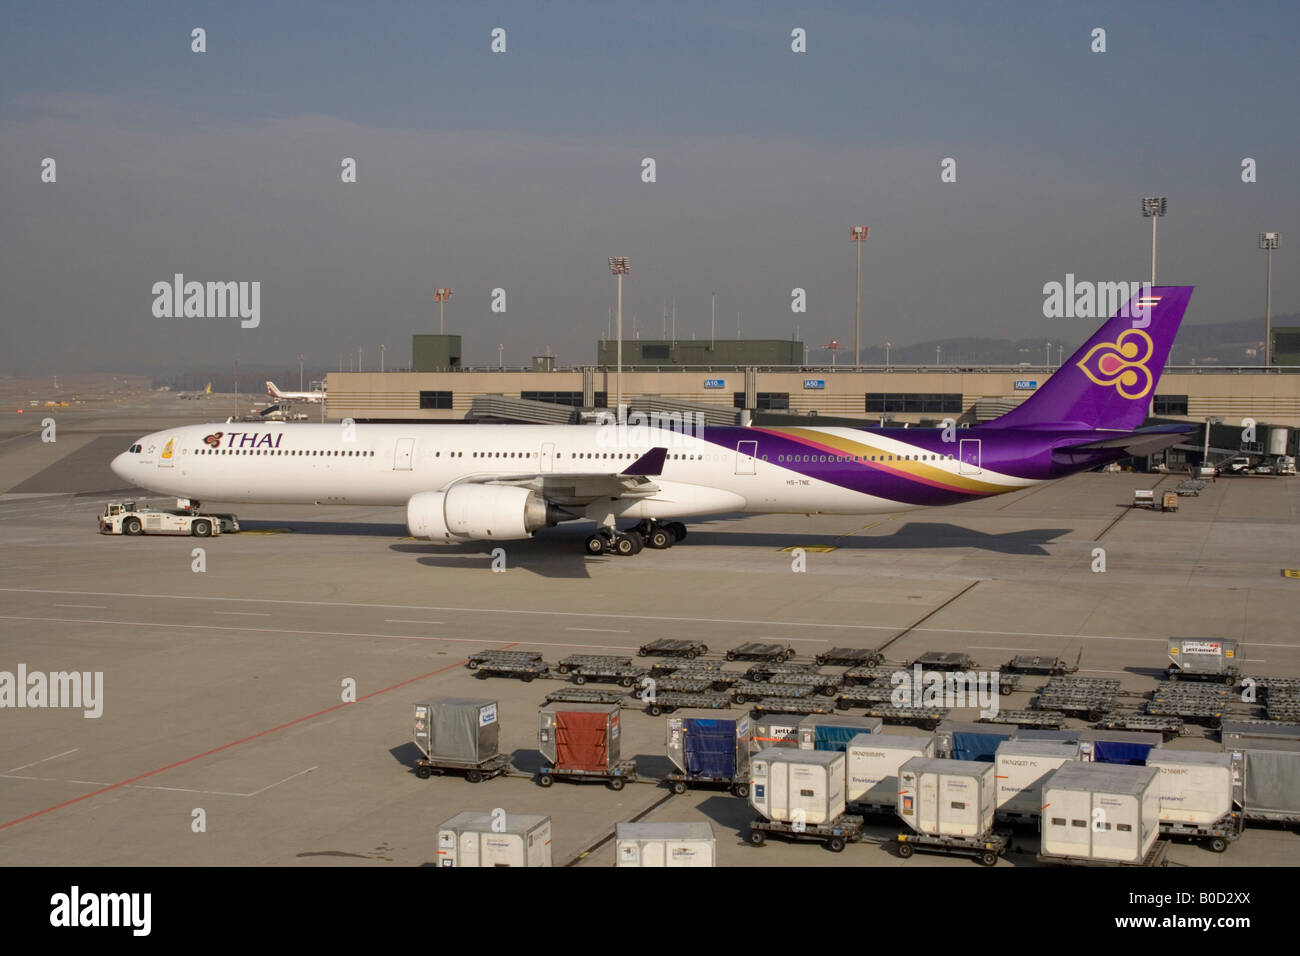 Thai Airways International Airbus A340-600 being towed to its gate at Zurich Airport, with air cargo containers in the foreground Stock Photo